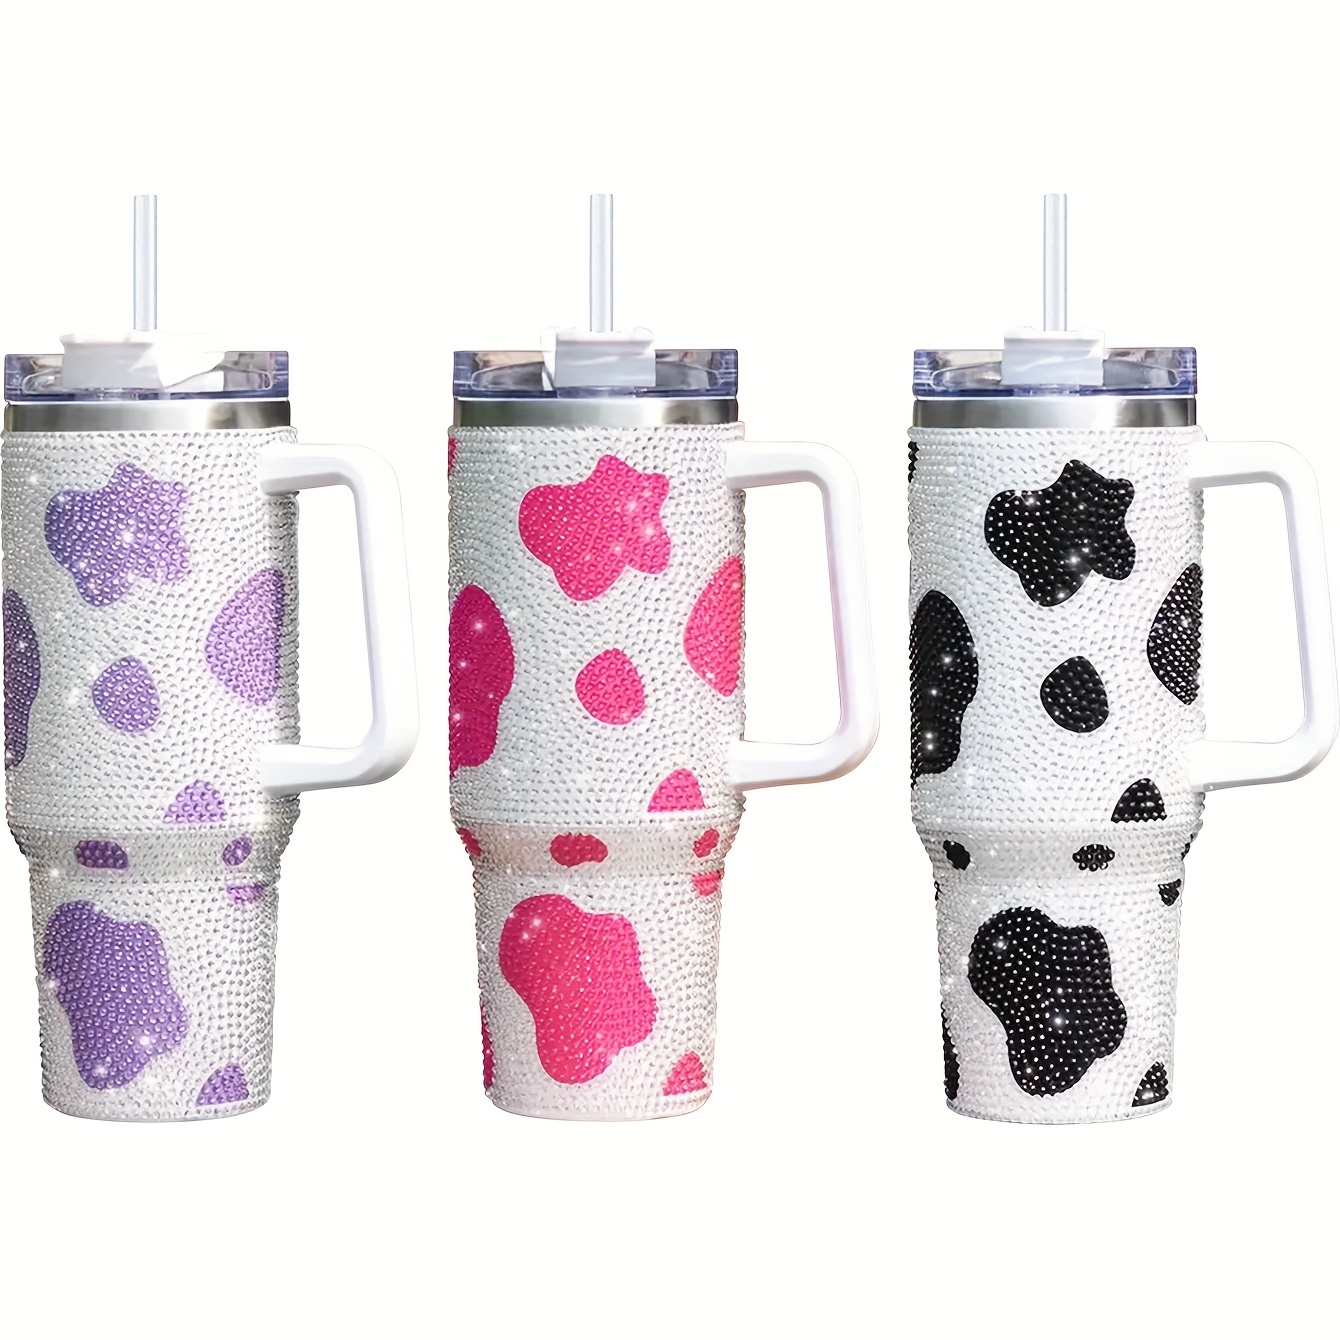 Heqianco Cow Tumbler with Handle 40oz Cow Tumbler Cow Gifts for Women Cow  Print Cup Insulated Stainl…See more Heqianco Cow Tumbler with Handle 40oz